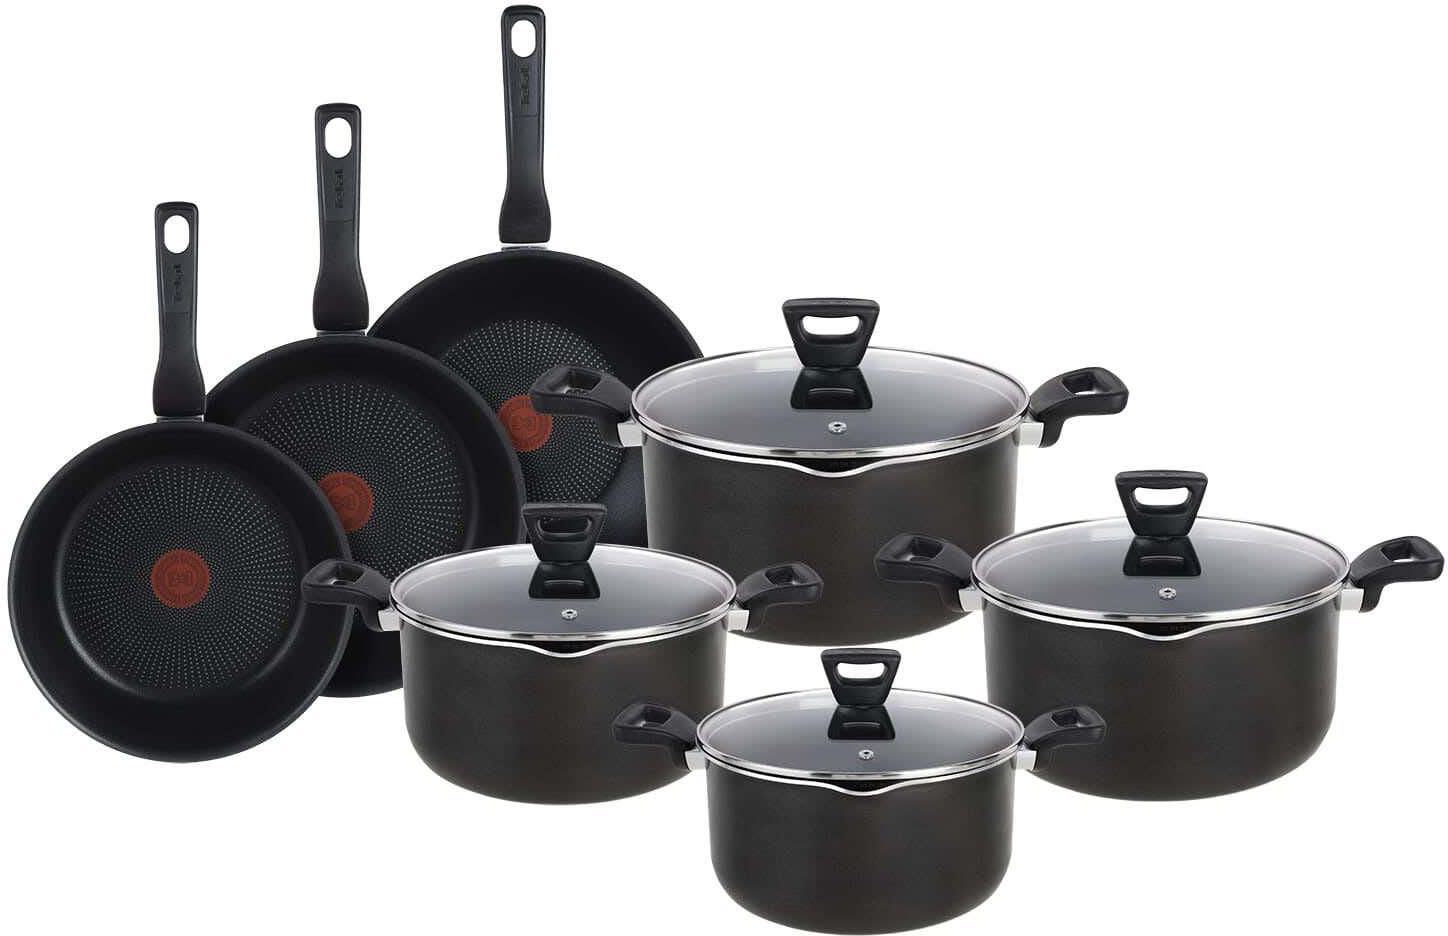 Get Tefal Cookware Set with lid, 11 Pieces - Dark Brown with best offers | Raneen.com